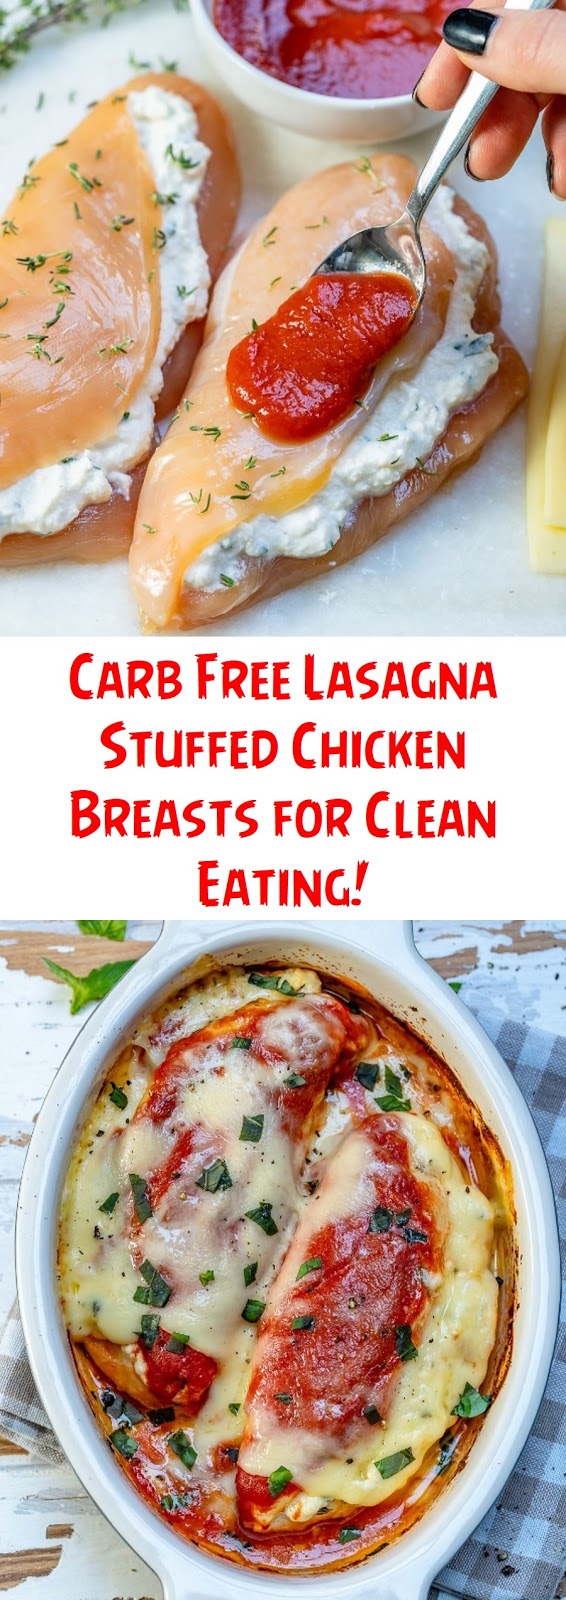 Carb Free Lasagna Stuffed Chicken Breasts for Clean Eating!